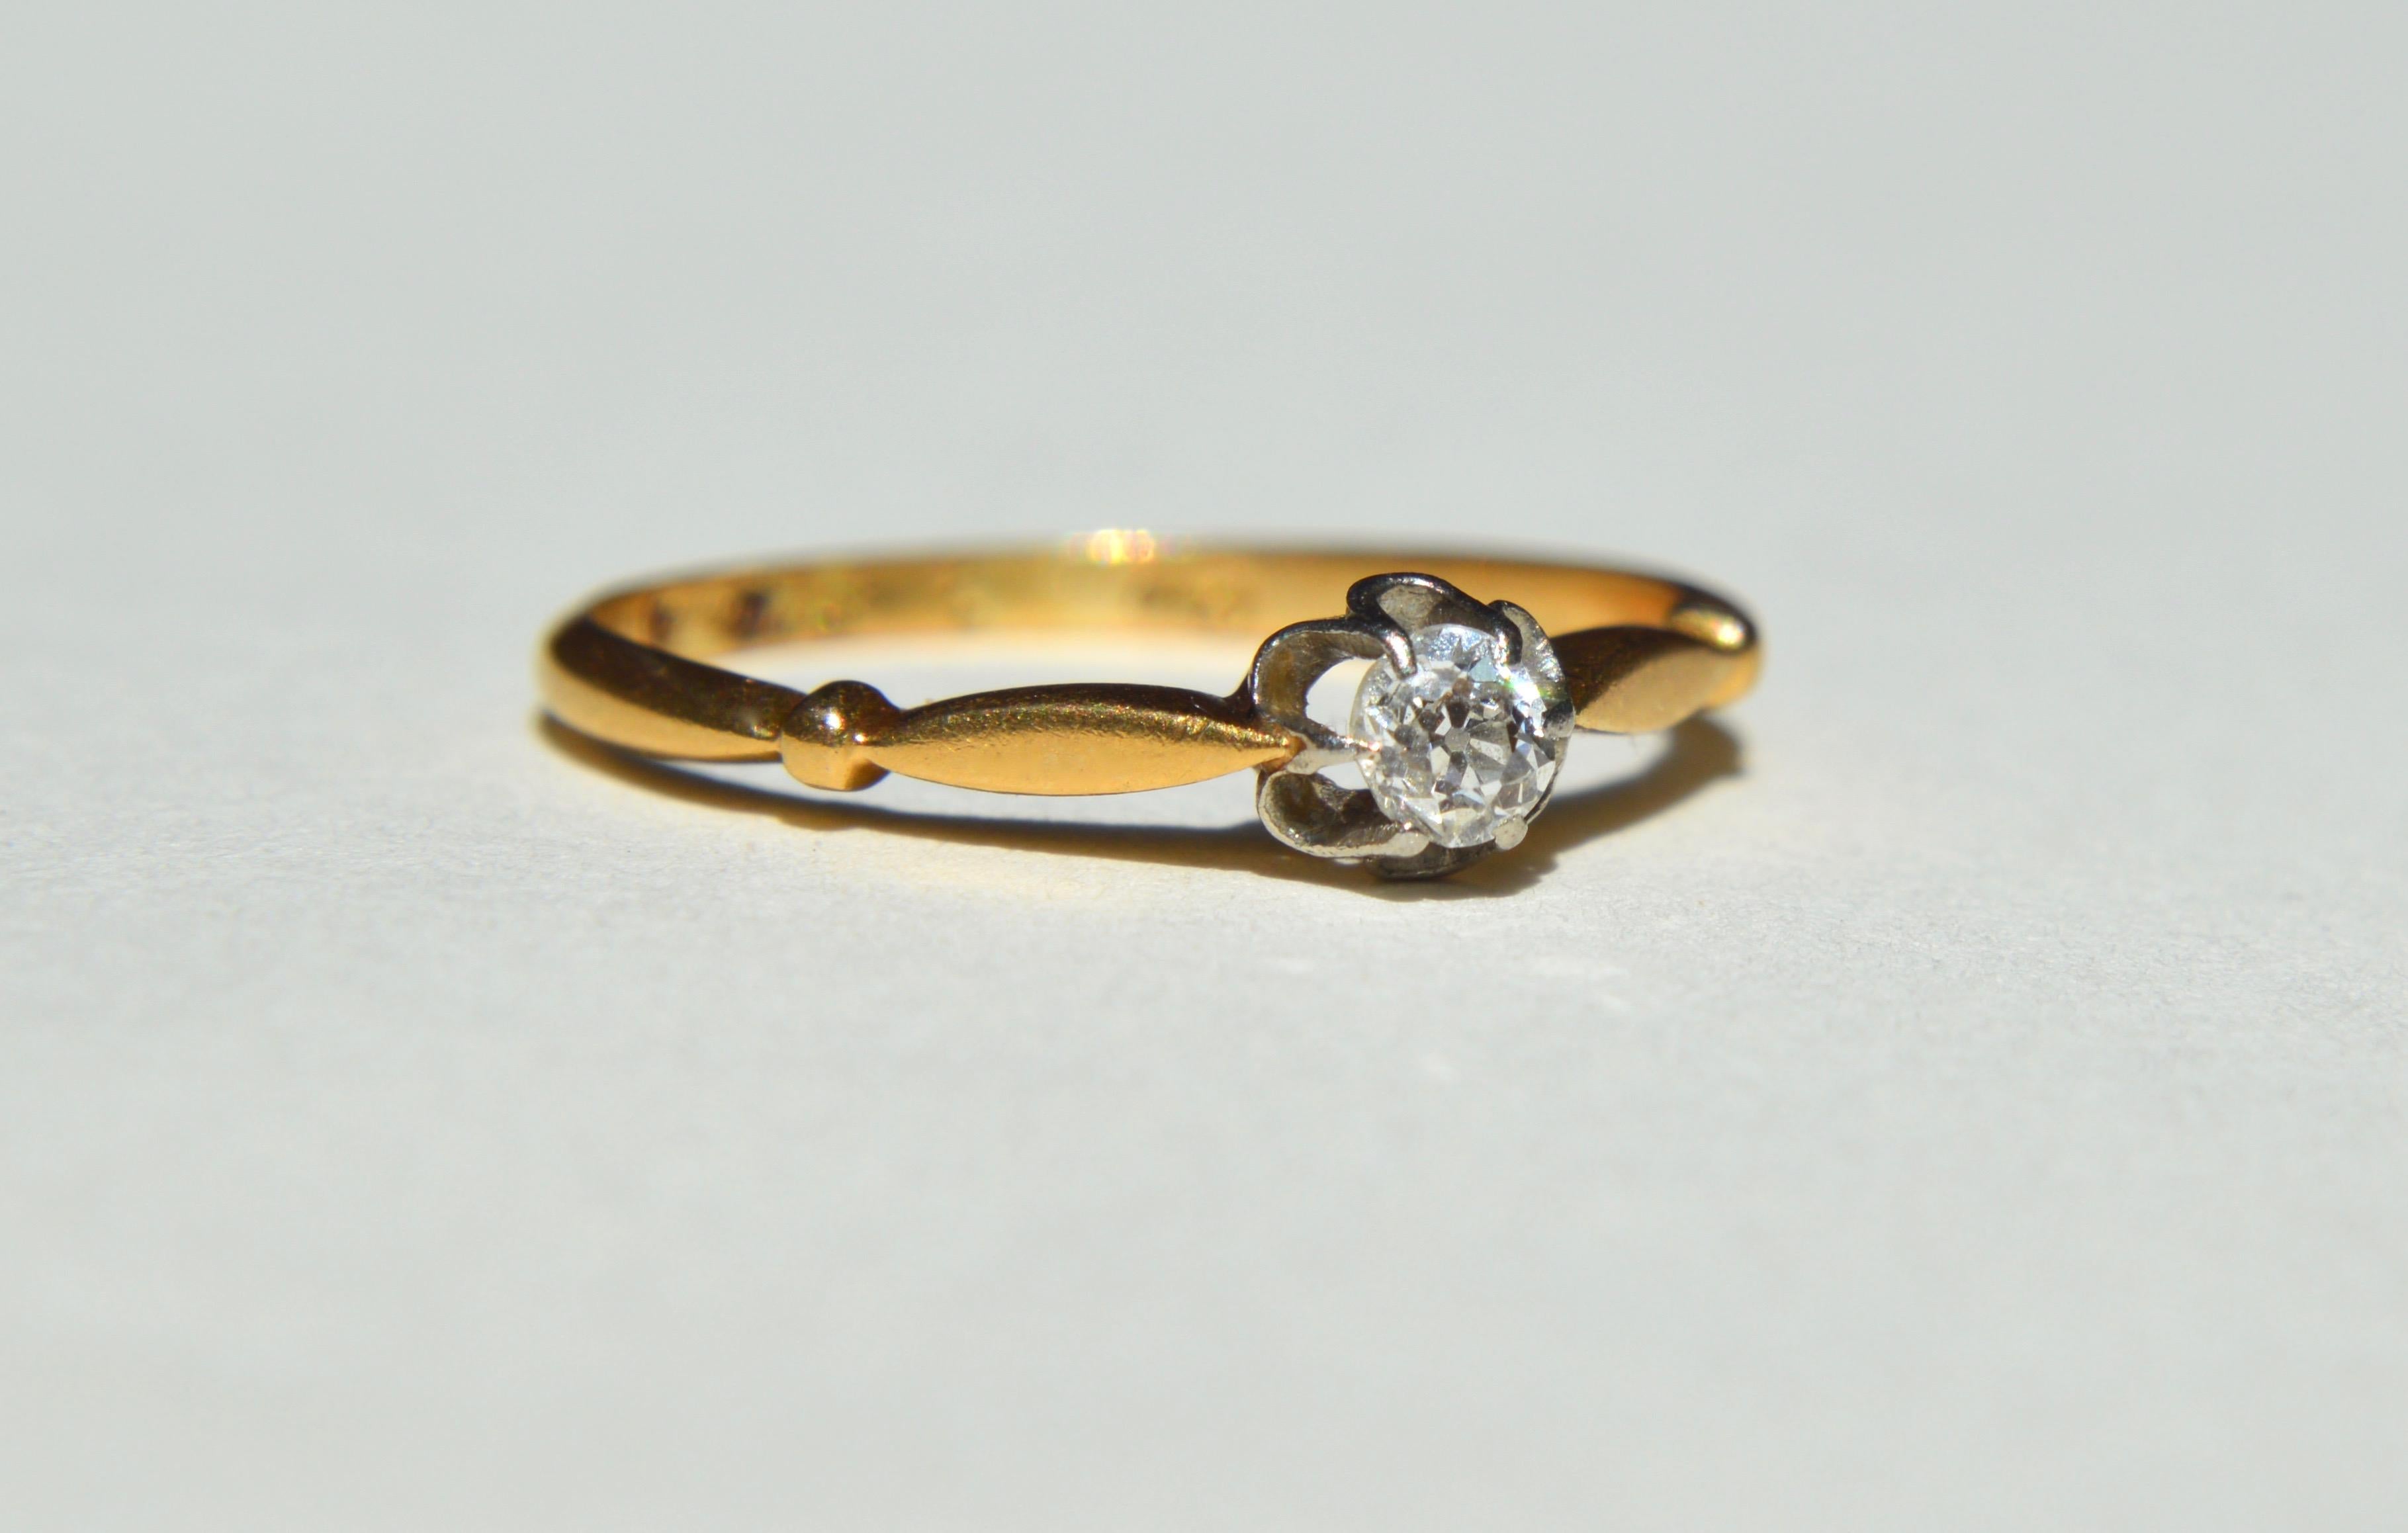 Lovely English origin Victorian era antique circa 1880s old minecut diamond with a buttercup setting in 18K yellow gold. Size 6.5, can be resized by a jeweler. In good condition. Diamond has been graded as color E, clarity VS1. Marked and tested as